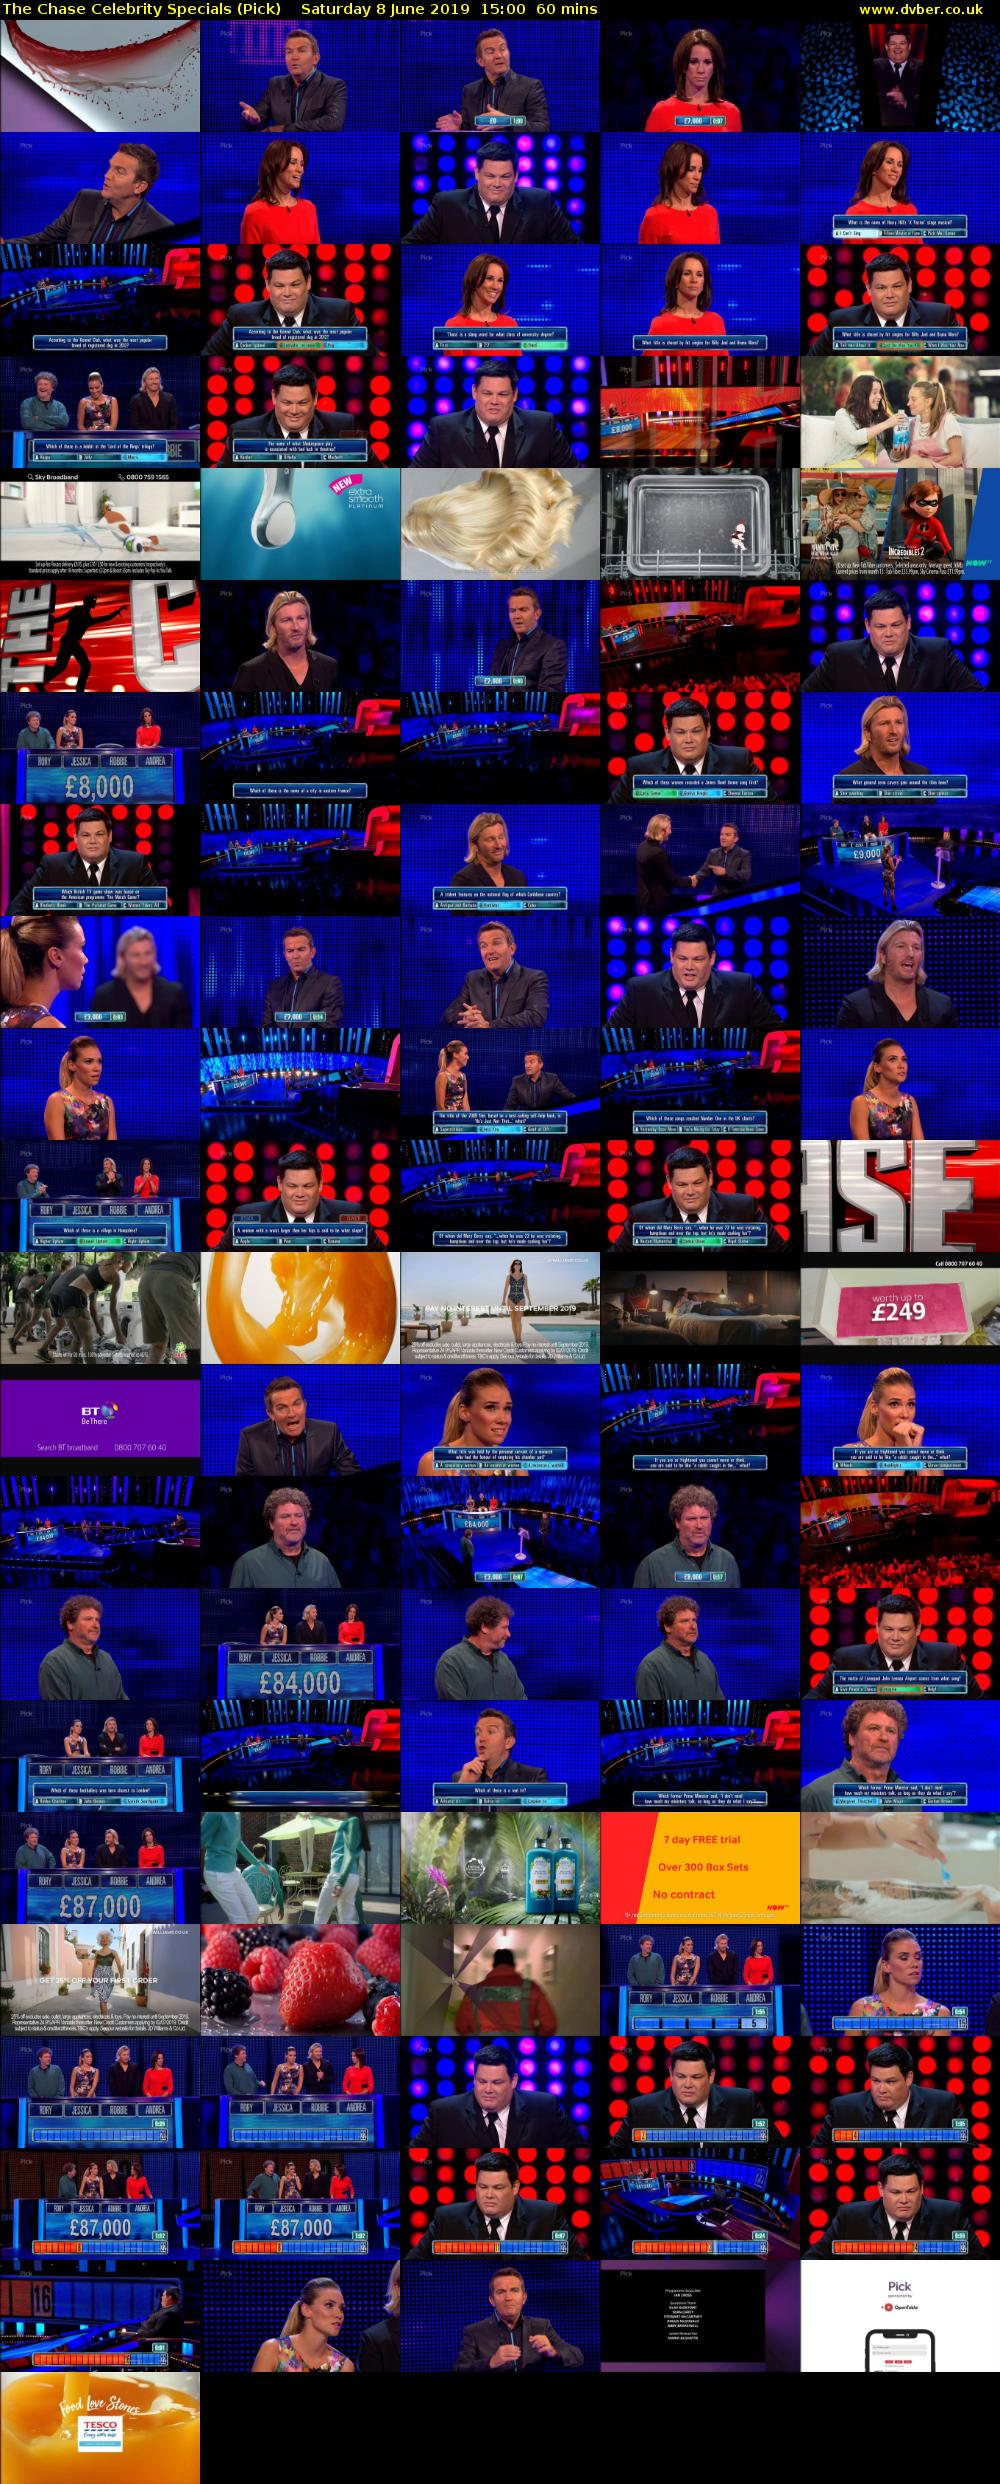 The Chase Celebrity Specials (Pick) Saturday 8 June 2019 15:00 - 16:00